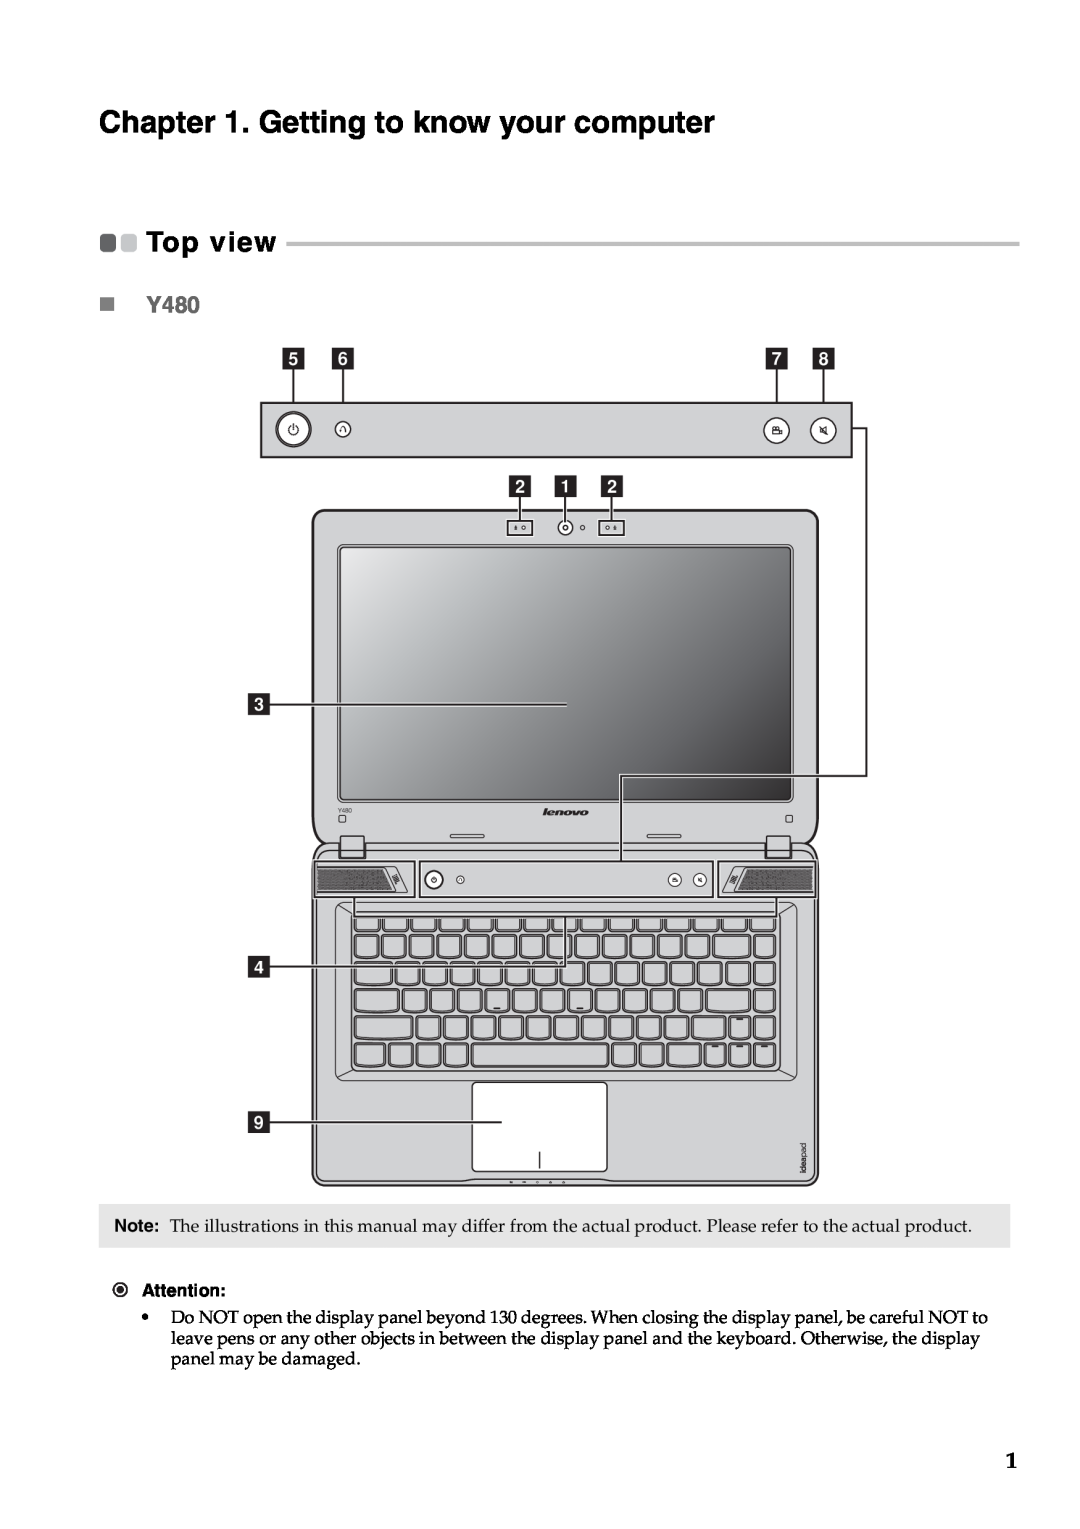 Lenovo Y580 manual Getting to know your computer, „ Y480, b a b, c d, Top view 